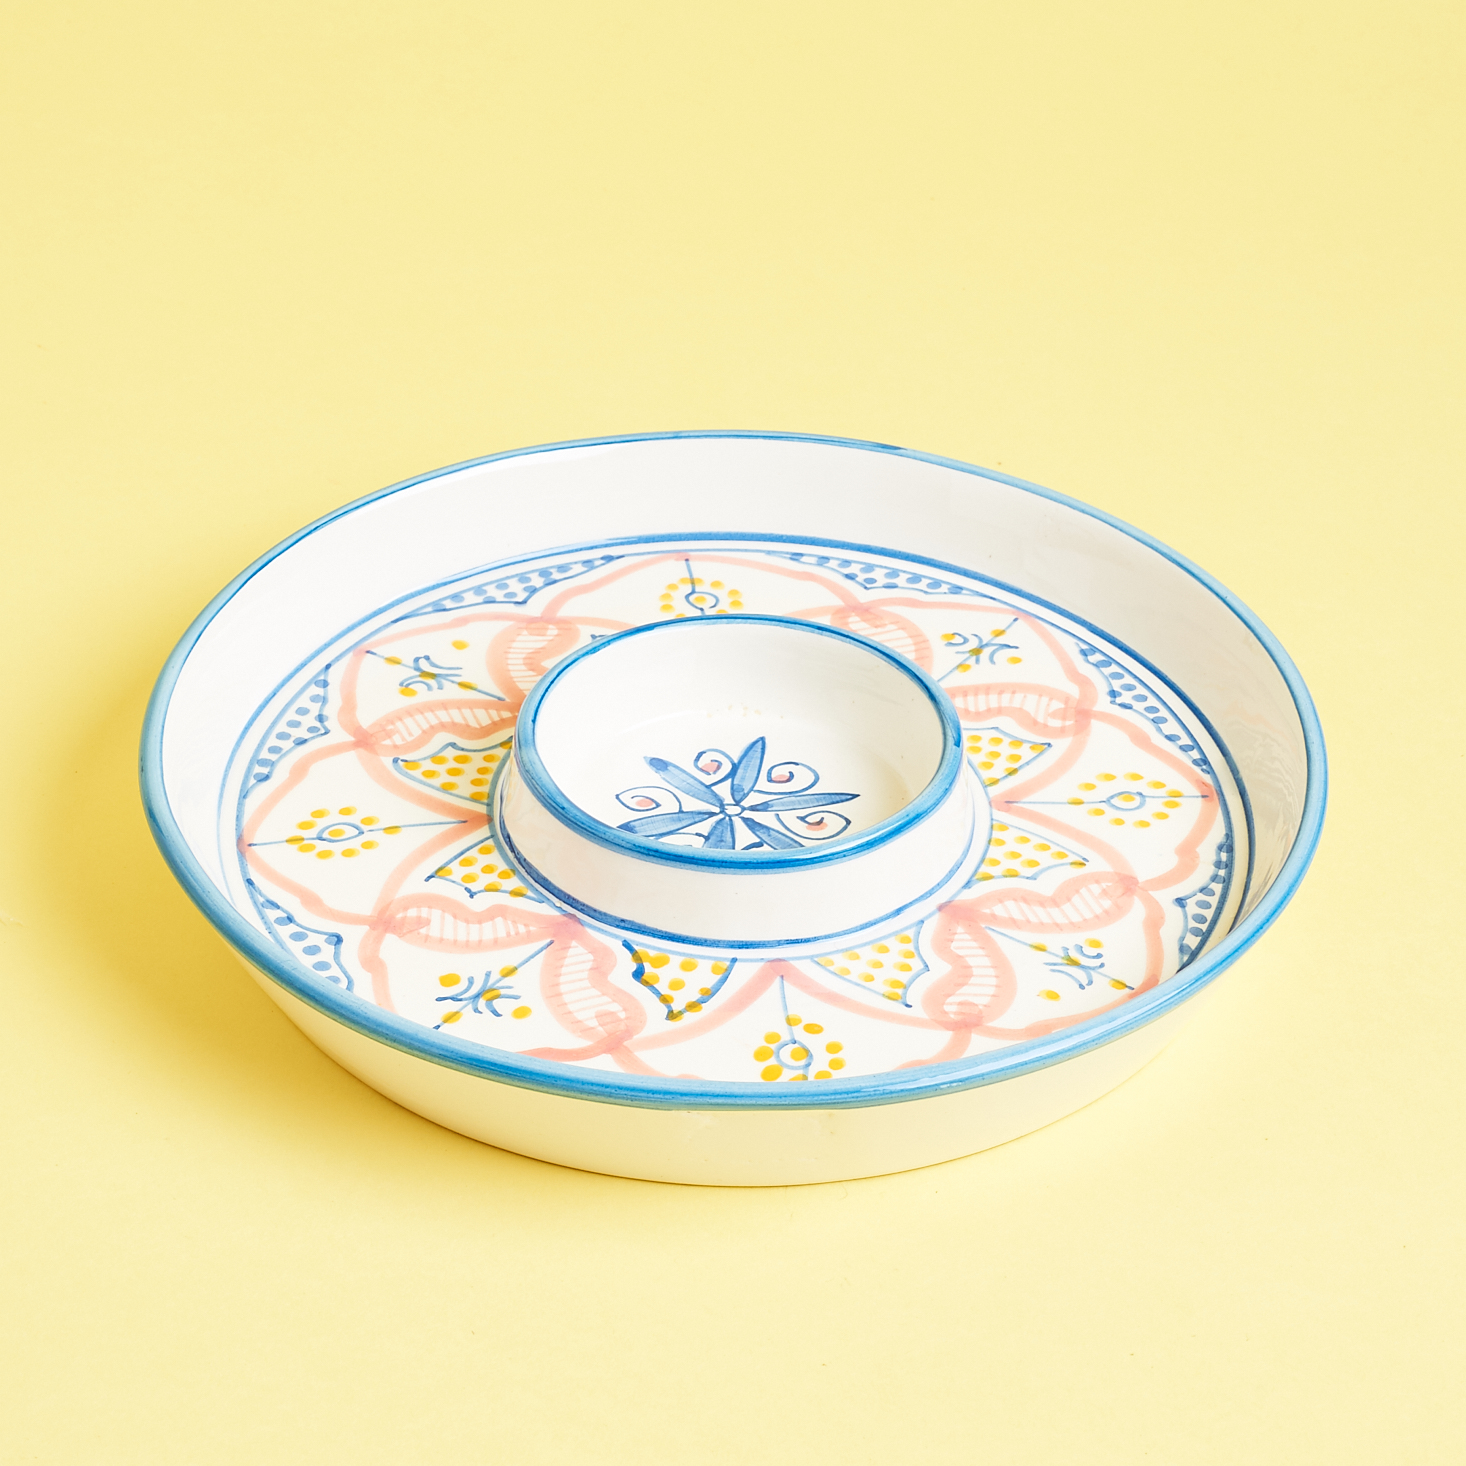 mezze plate with blue, pink, yellow, and white design